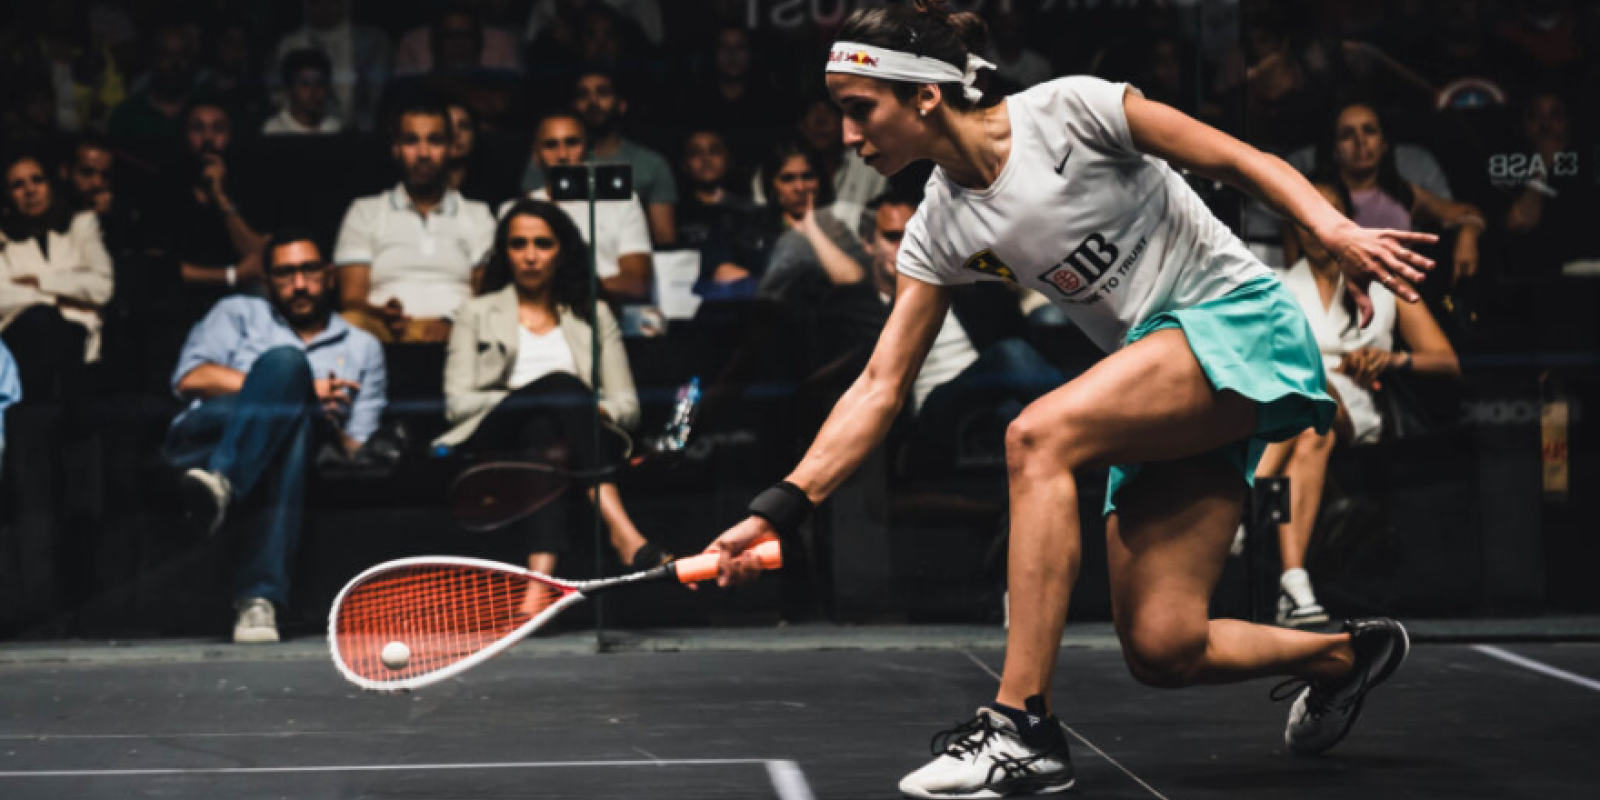 A woman is playing squash in front of an audience